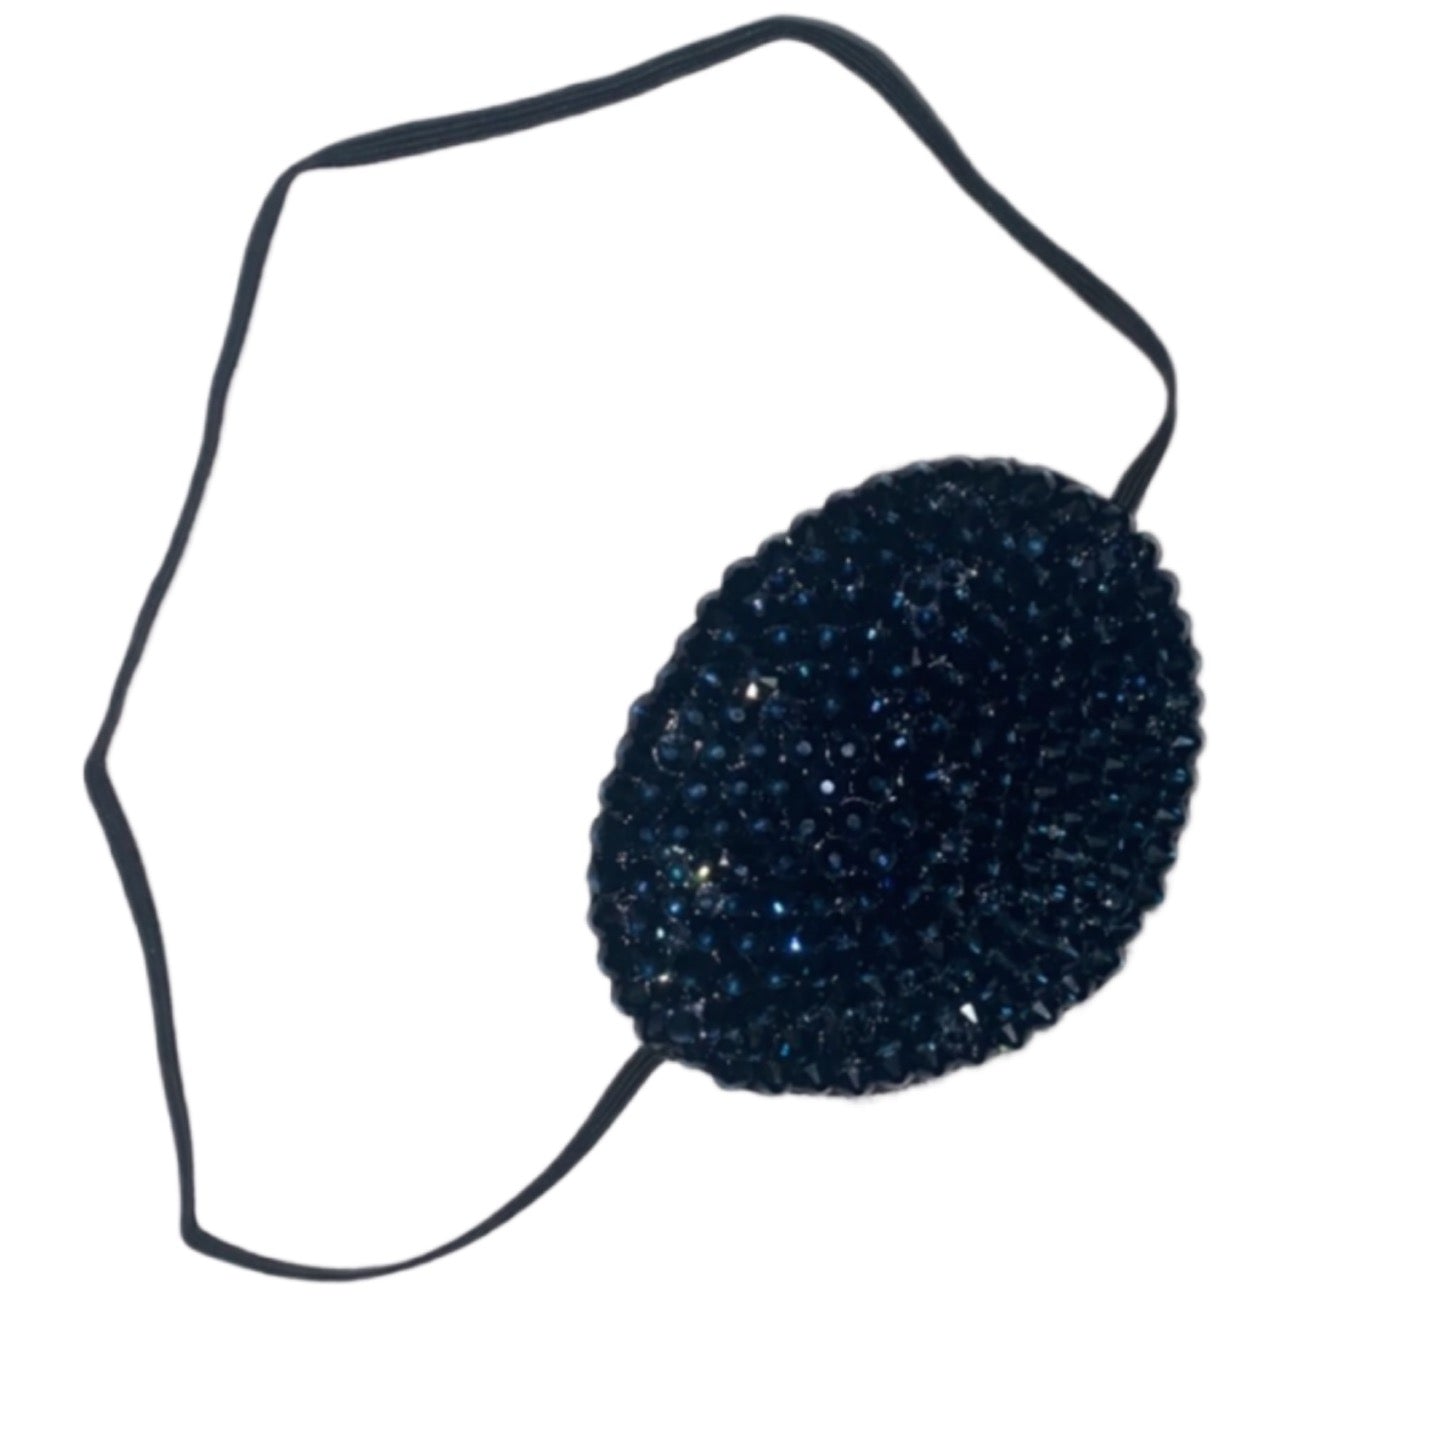 Black Eye Patch Bedazzled In Lux Montana Navy Blue Crystal